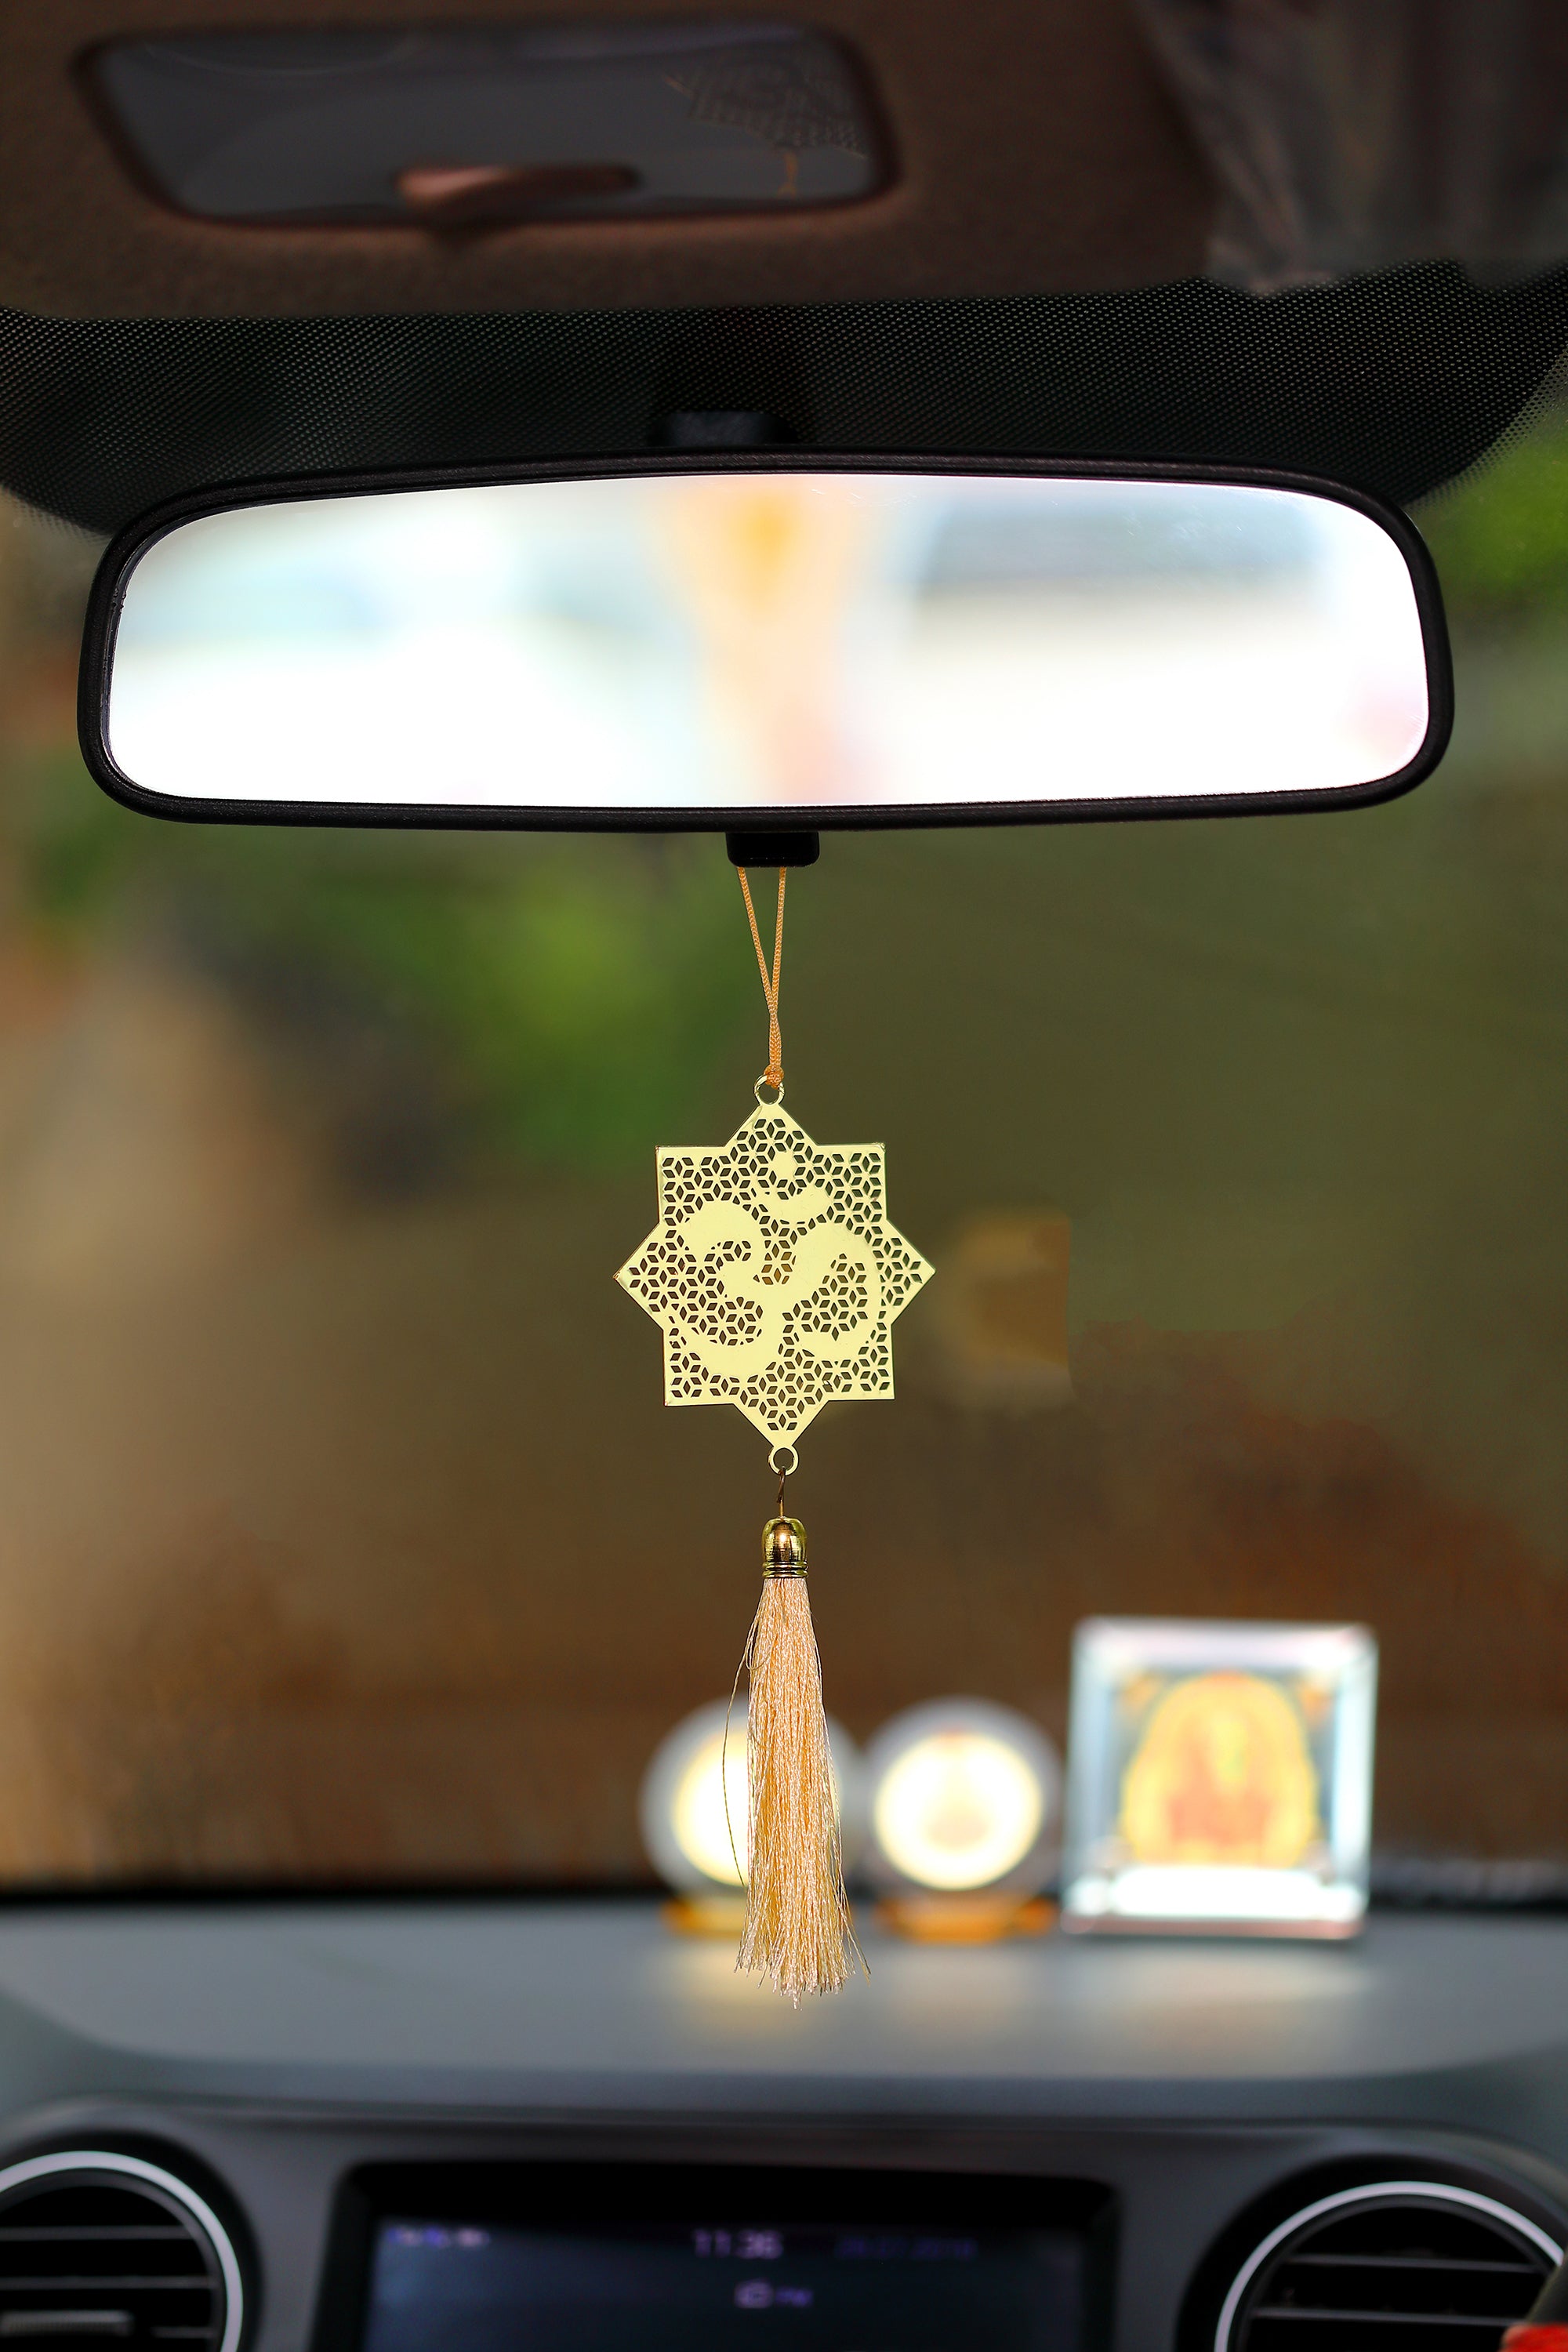 Pack of 2 - Hindu Om Symbol Hanging Accessories for Car rear view mirror Decor in Brass